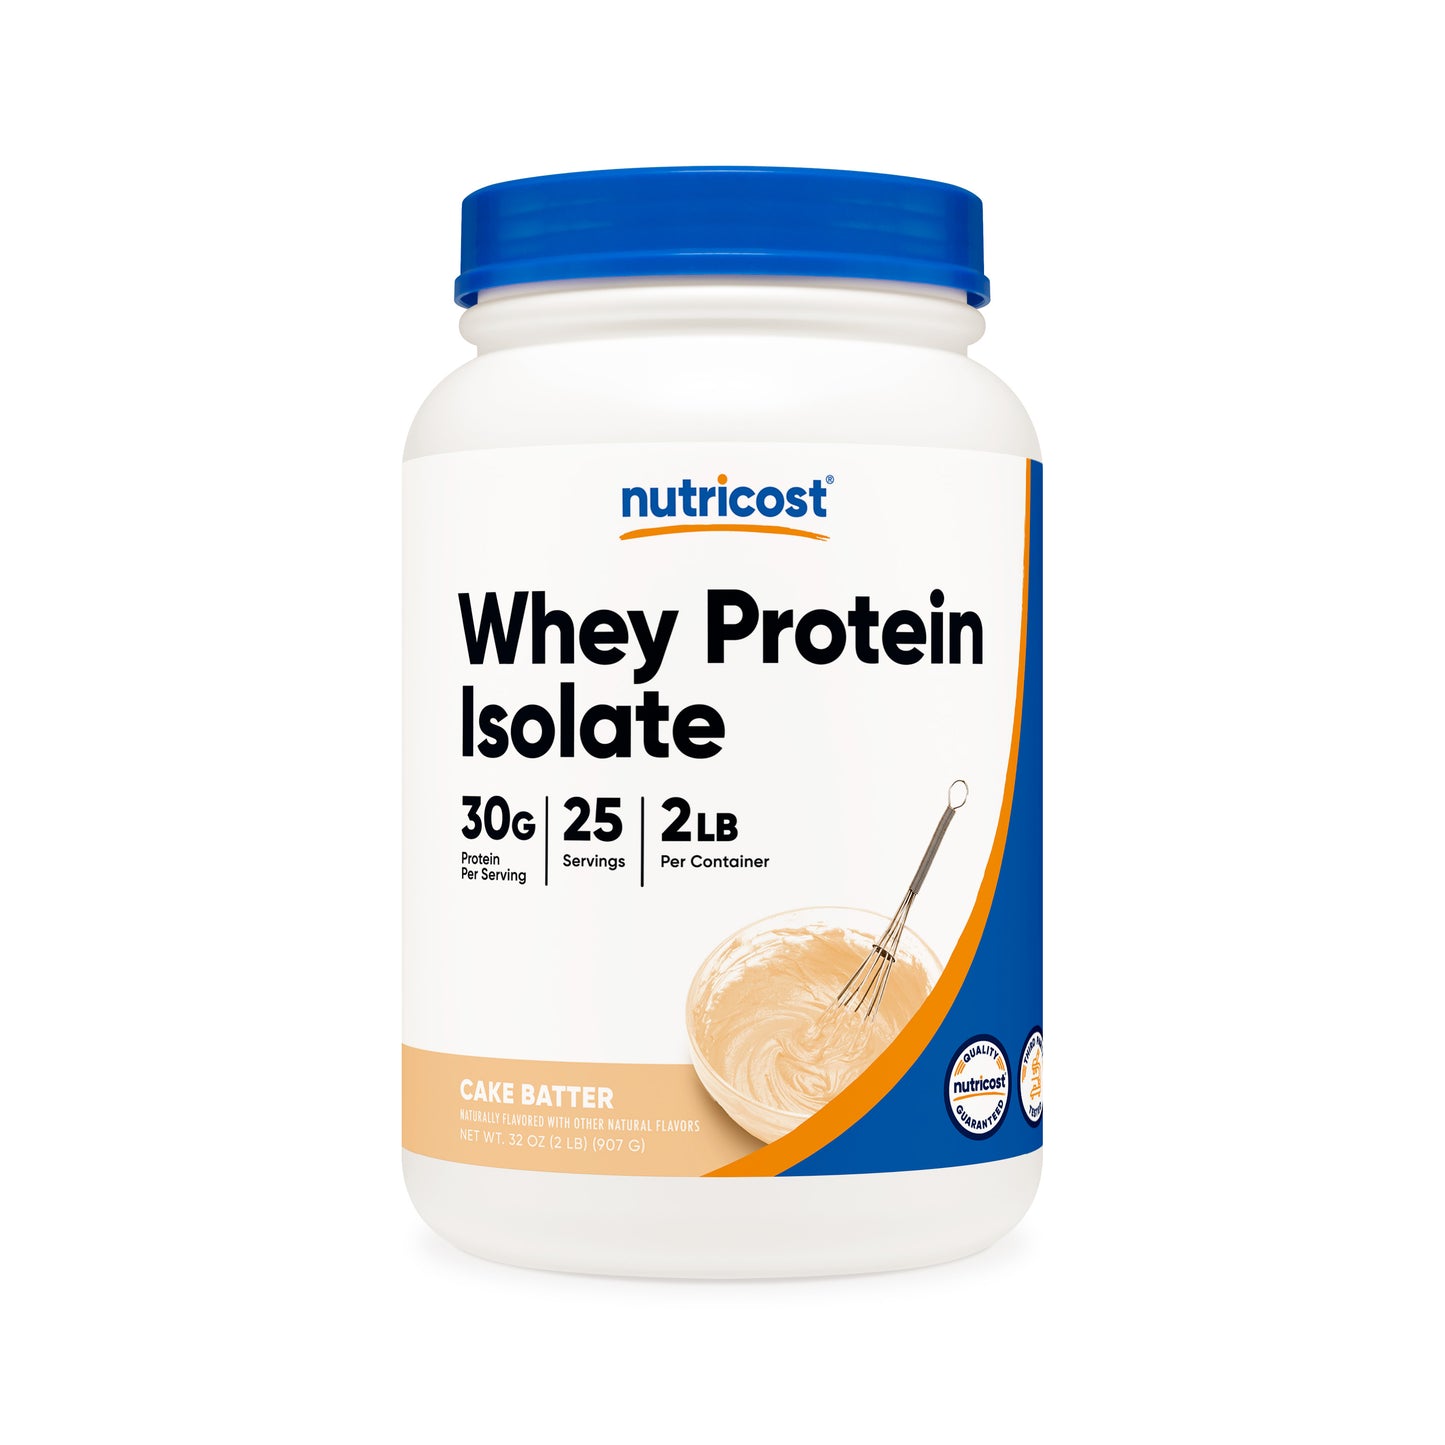 Nutricost Whey Protein Isolate